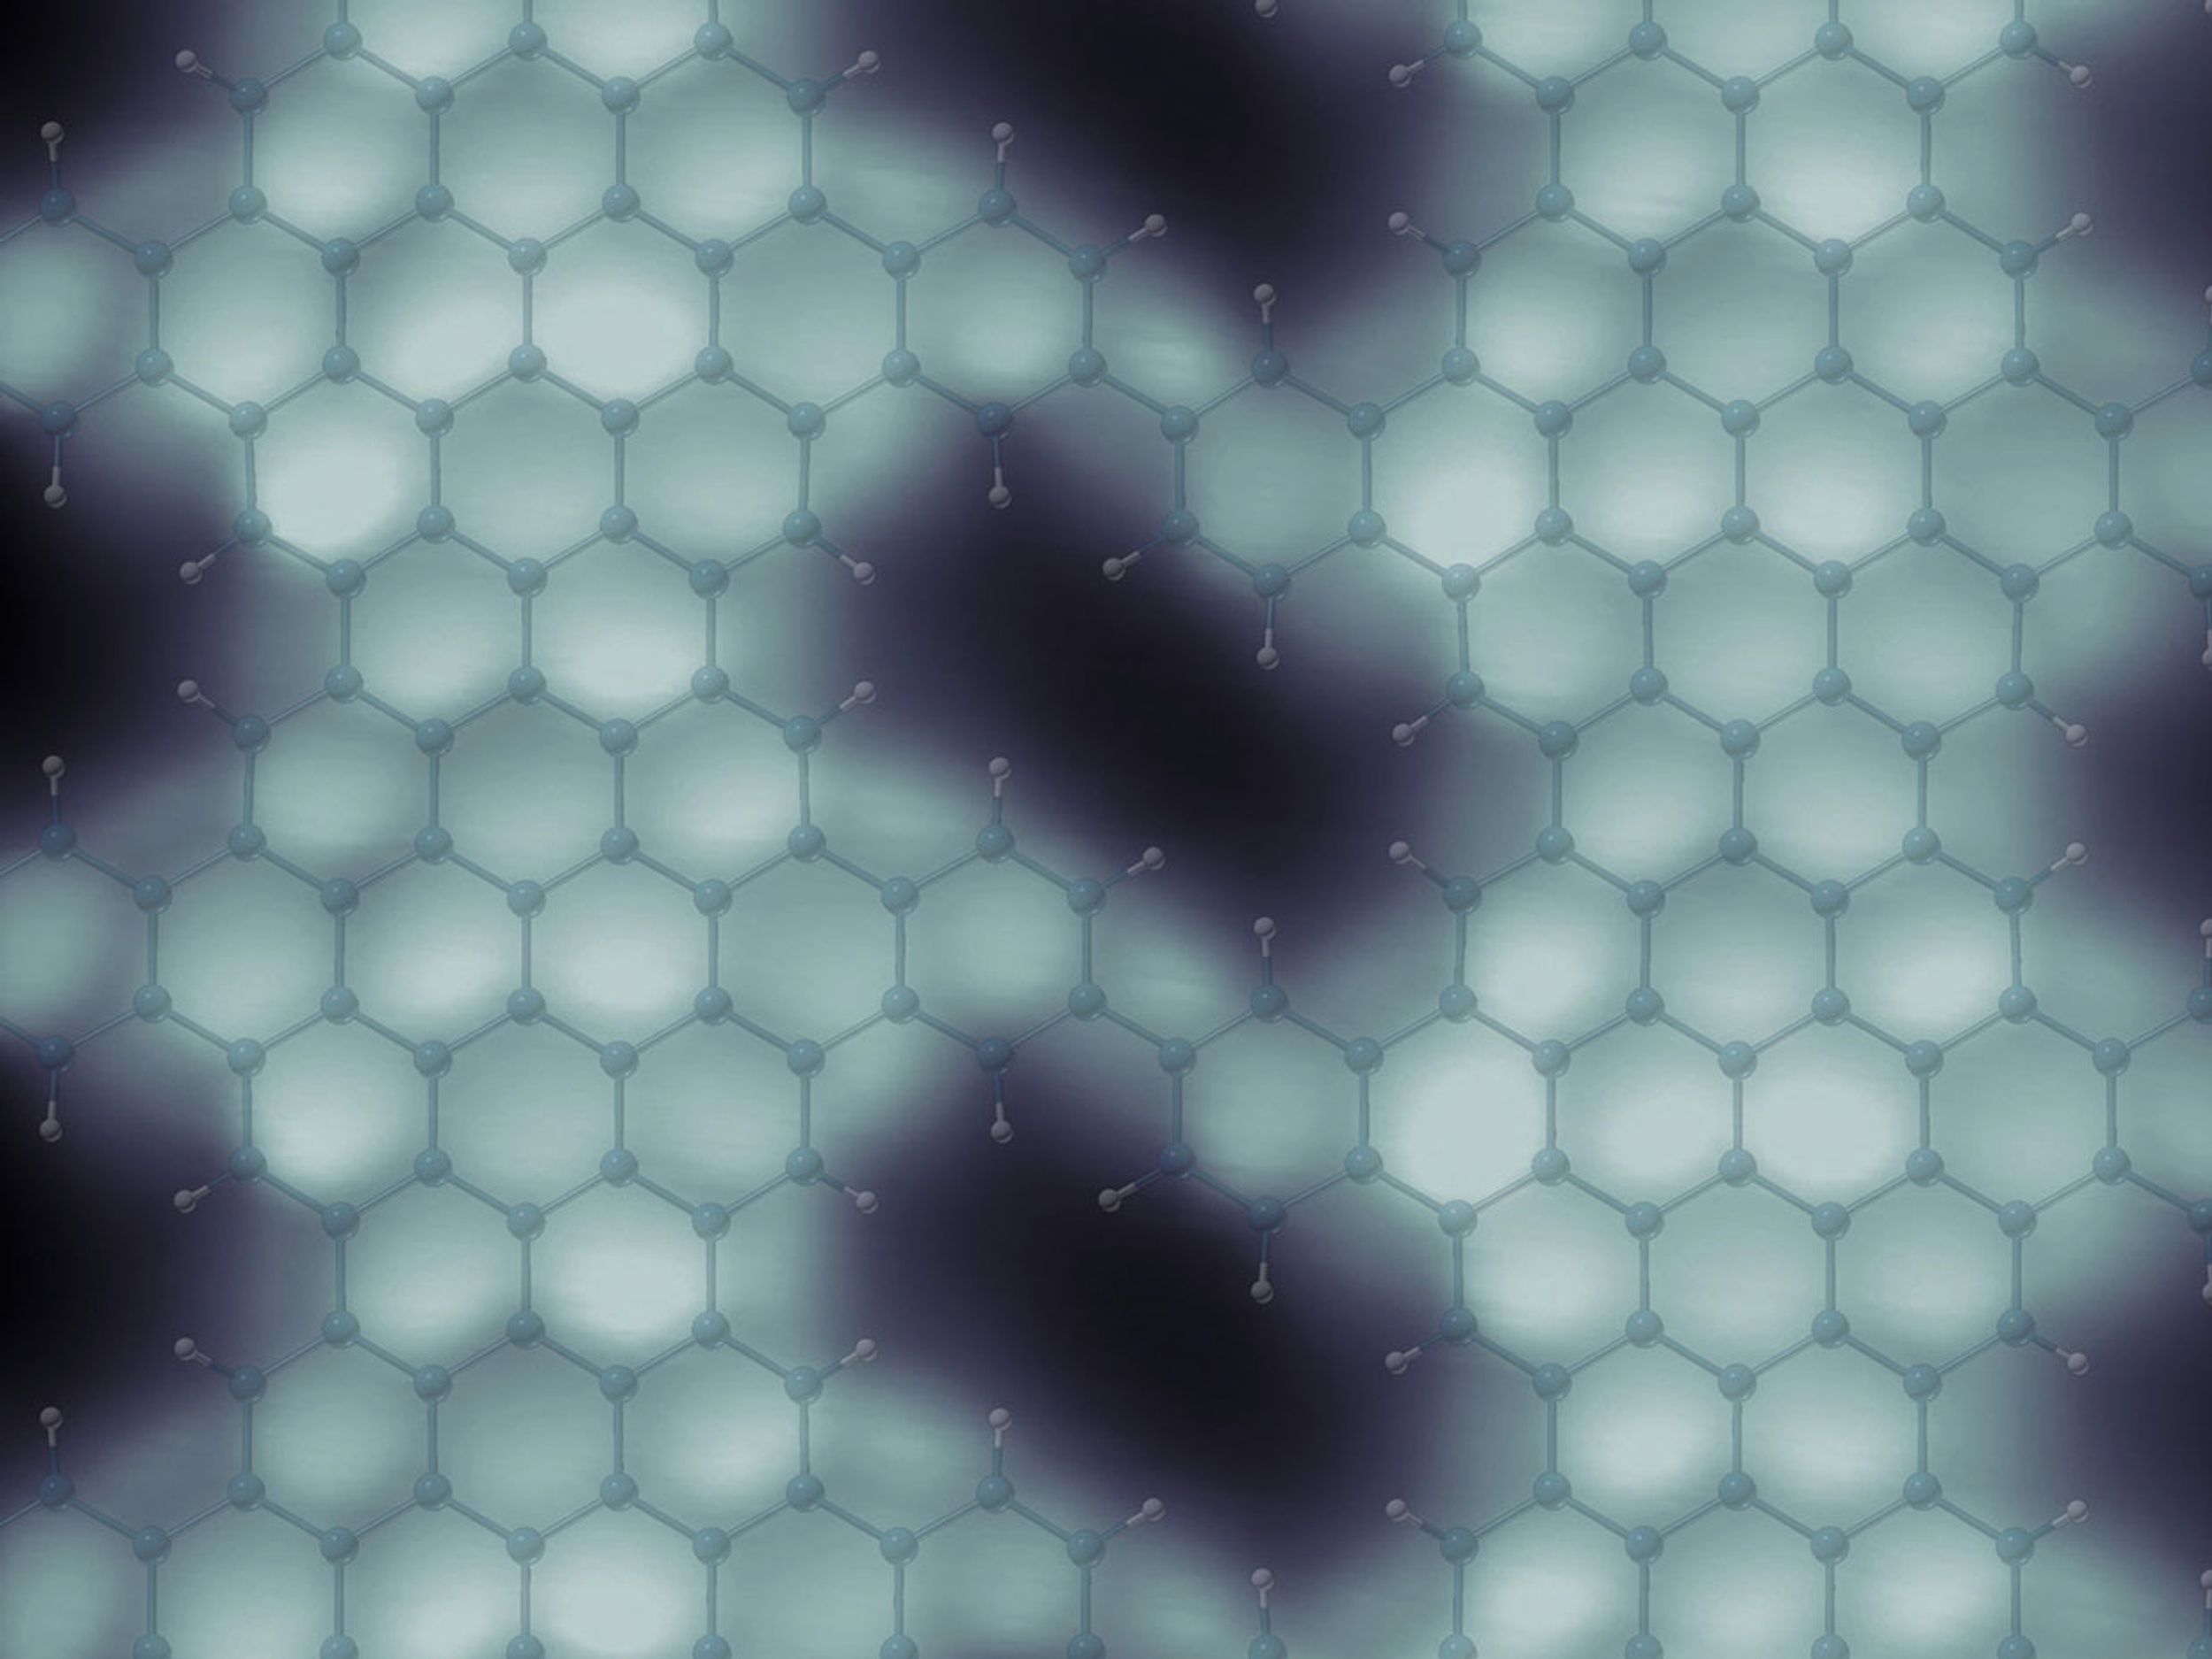 Magnified images revealing the internal structure of nanoporous graphene.